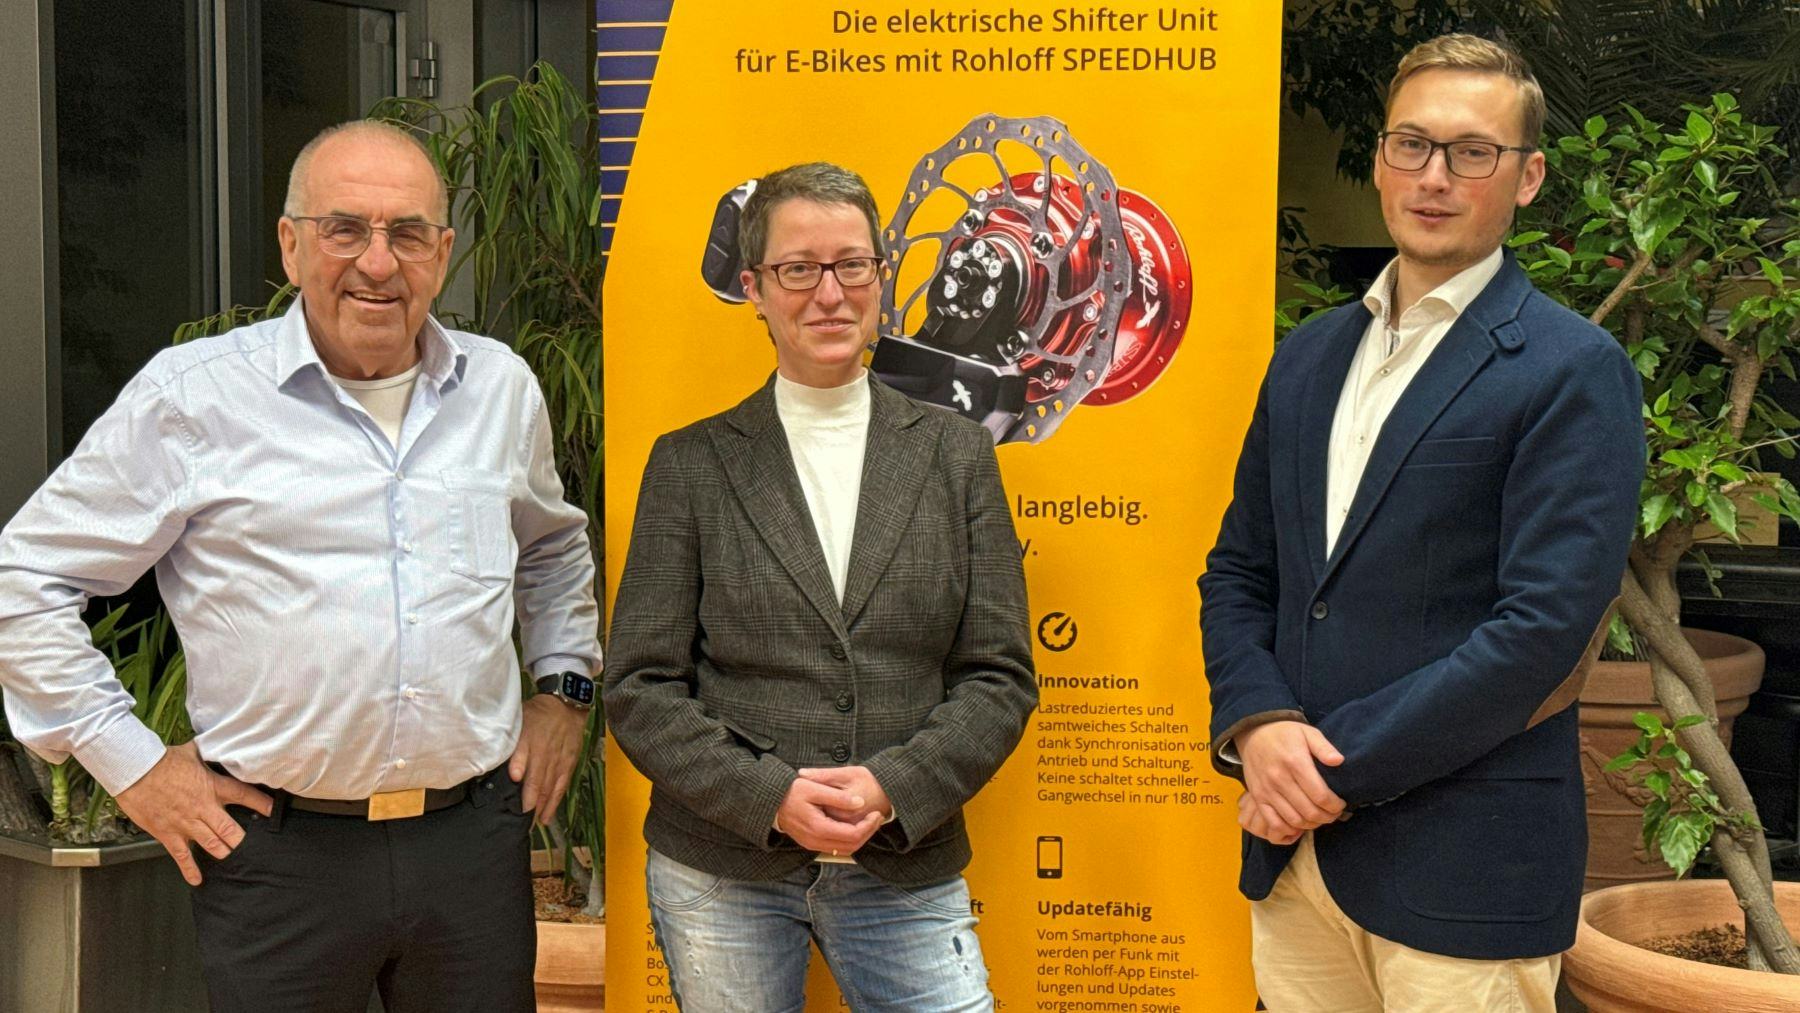 The New Supervisory Board at Rohloff AG (from left to right): Ernst Brust, Katja Lubitz and Constantin Ziehe. – Photo Rohloff